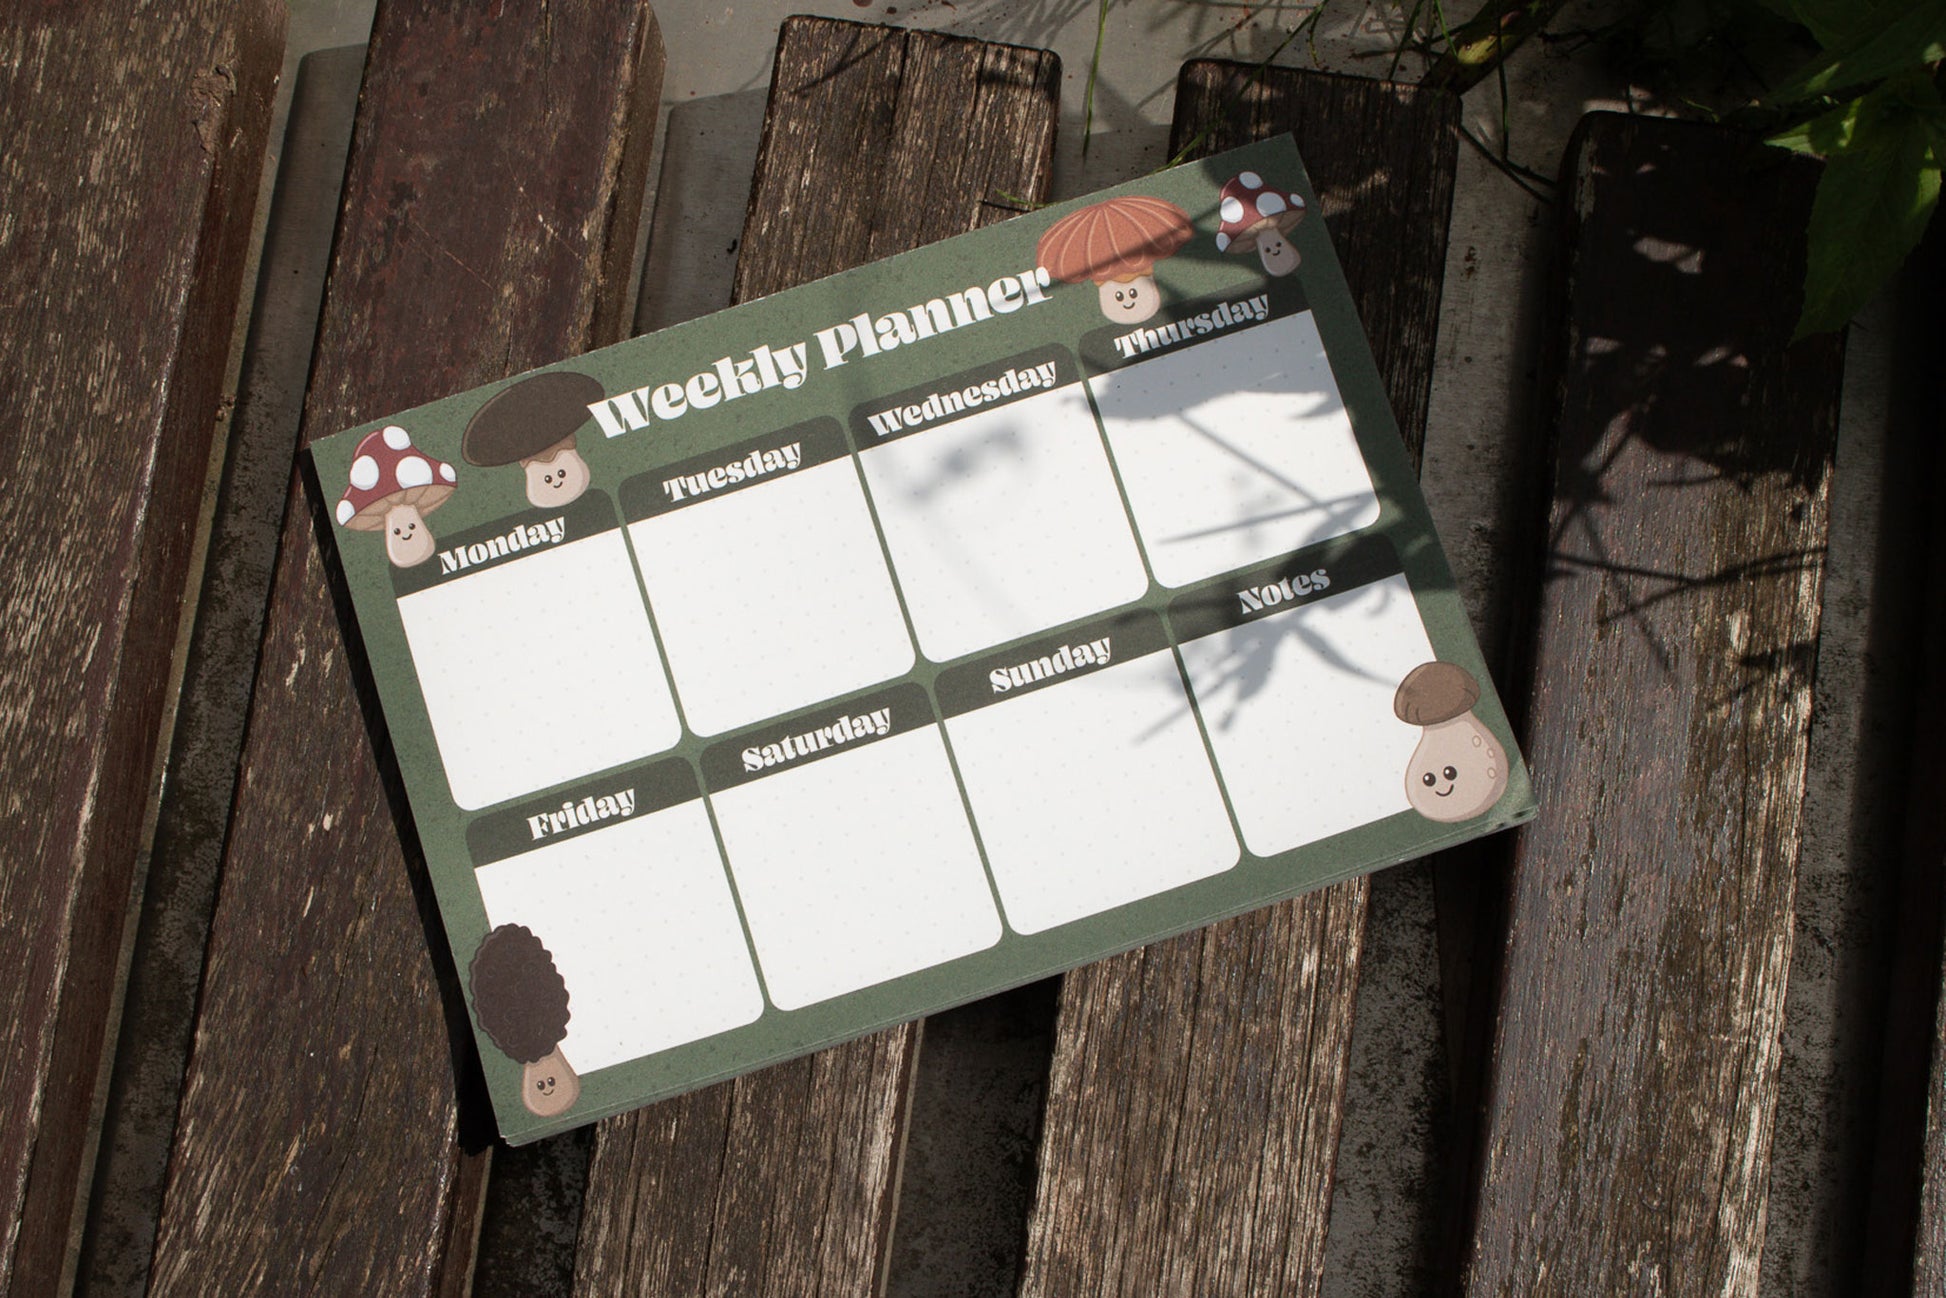 A5 Weekly Planner Pad with Mushroom Design by Mellow Apricot Studio - outside on wood with shadows